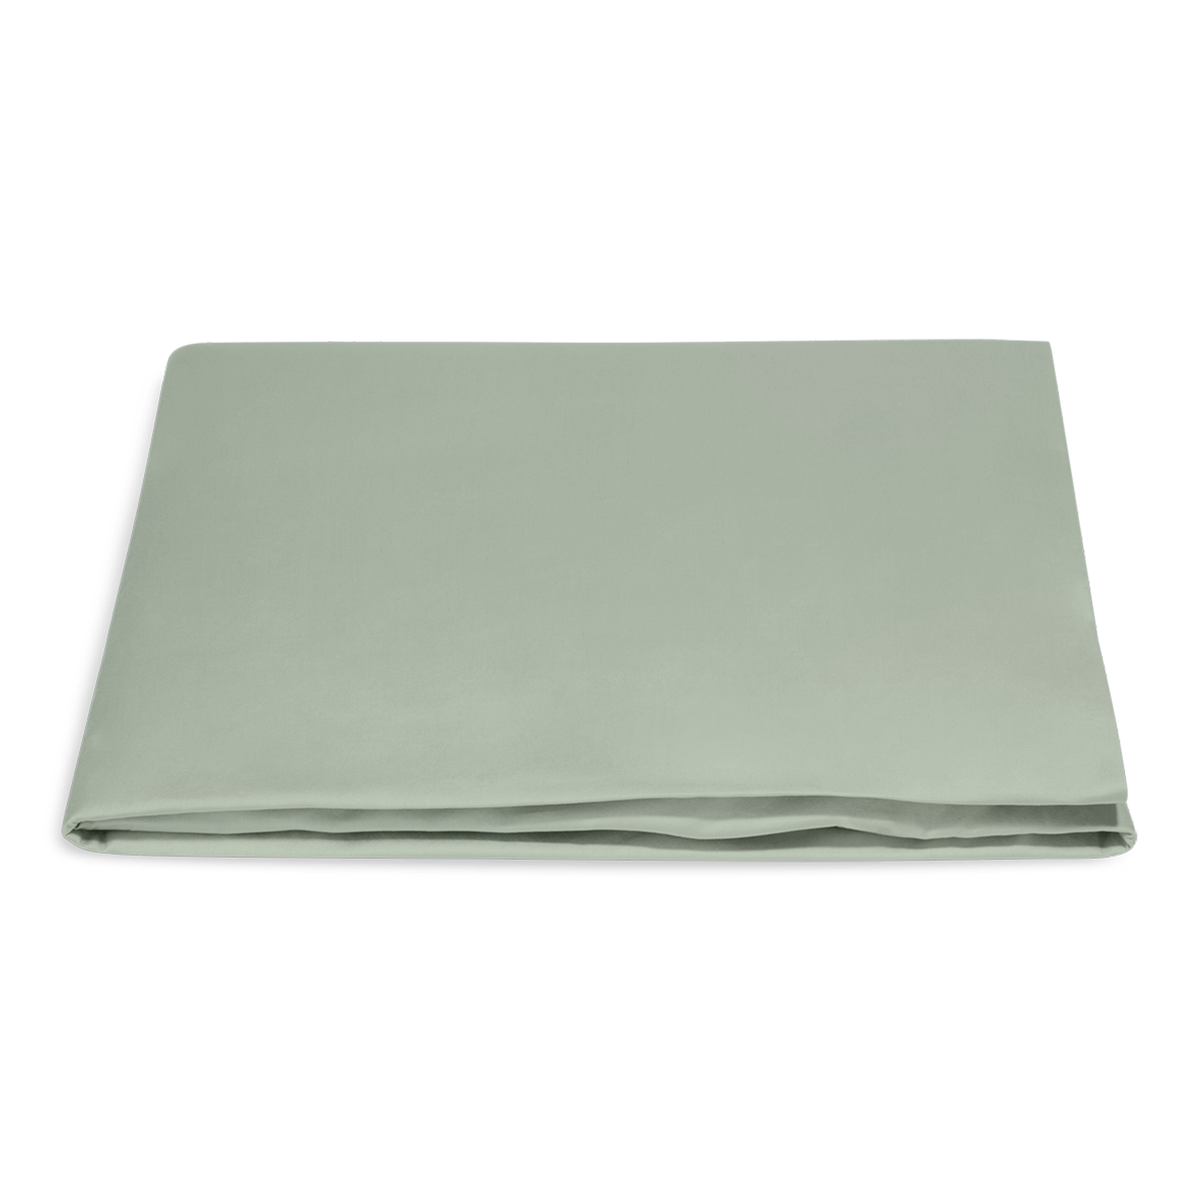 Folded Fitted Sheet of Matouk Nocturne Bedding Collection in Color Celadon